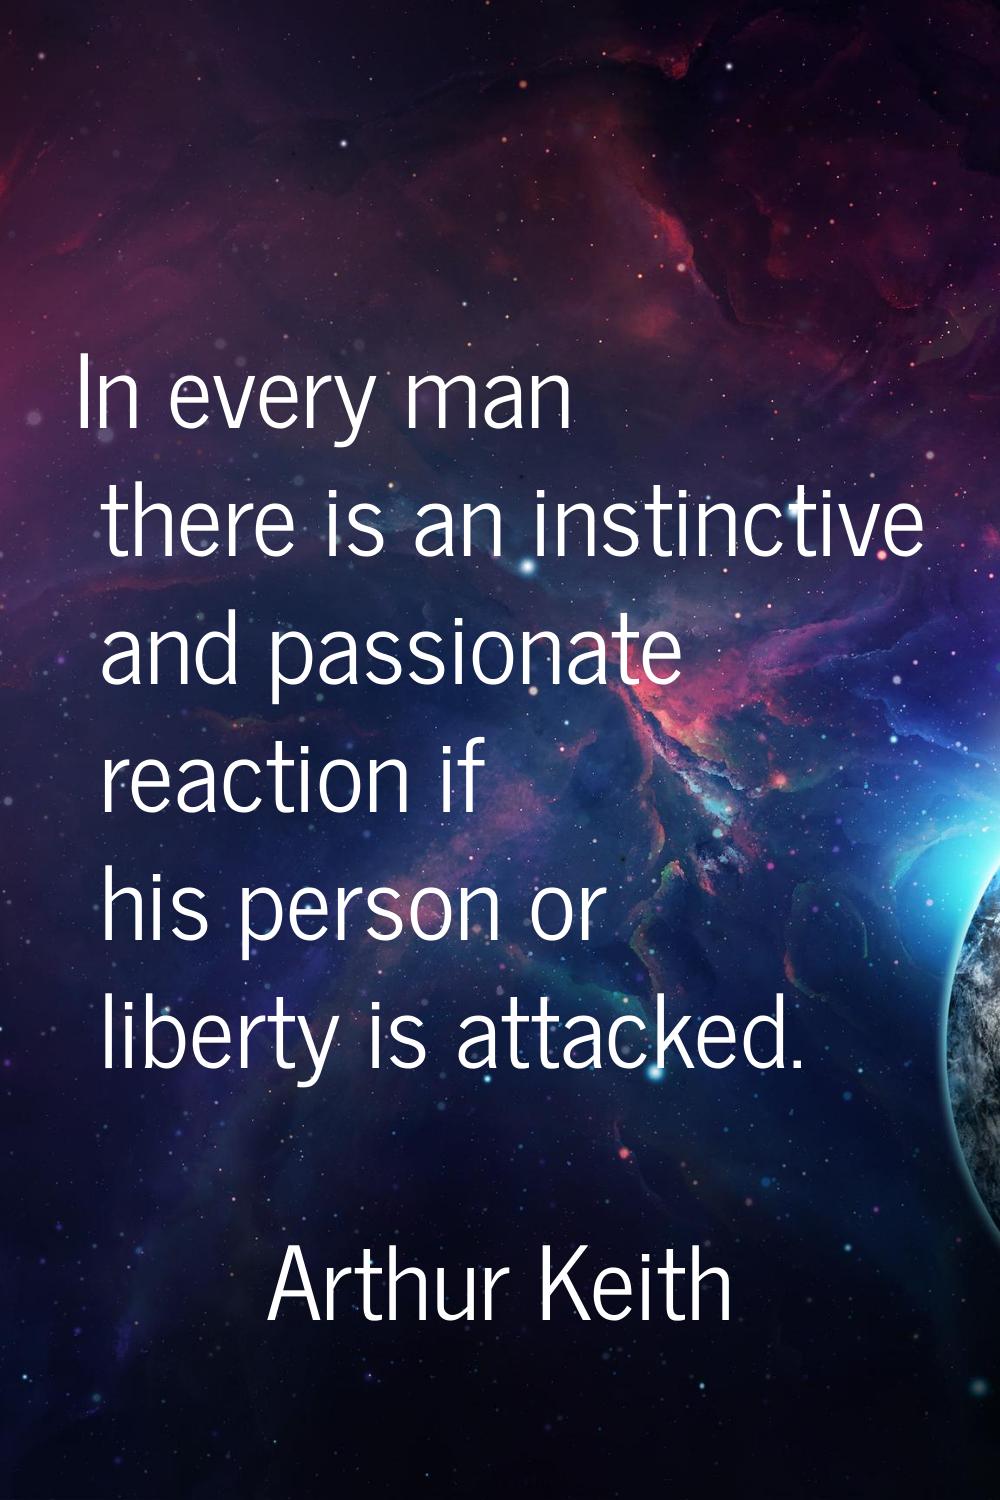 In every man there is an instinctive and passionate reaction if his person or liberty is attacked.